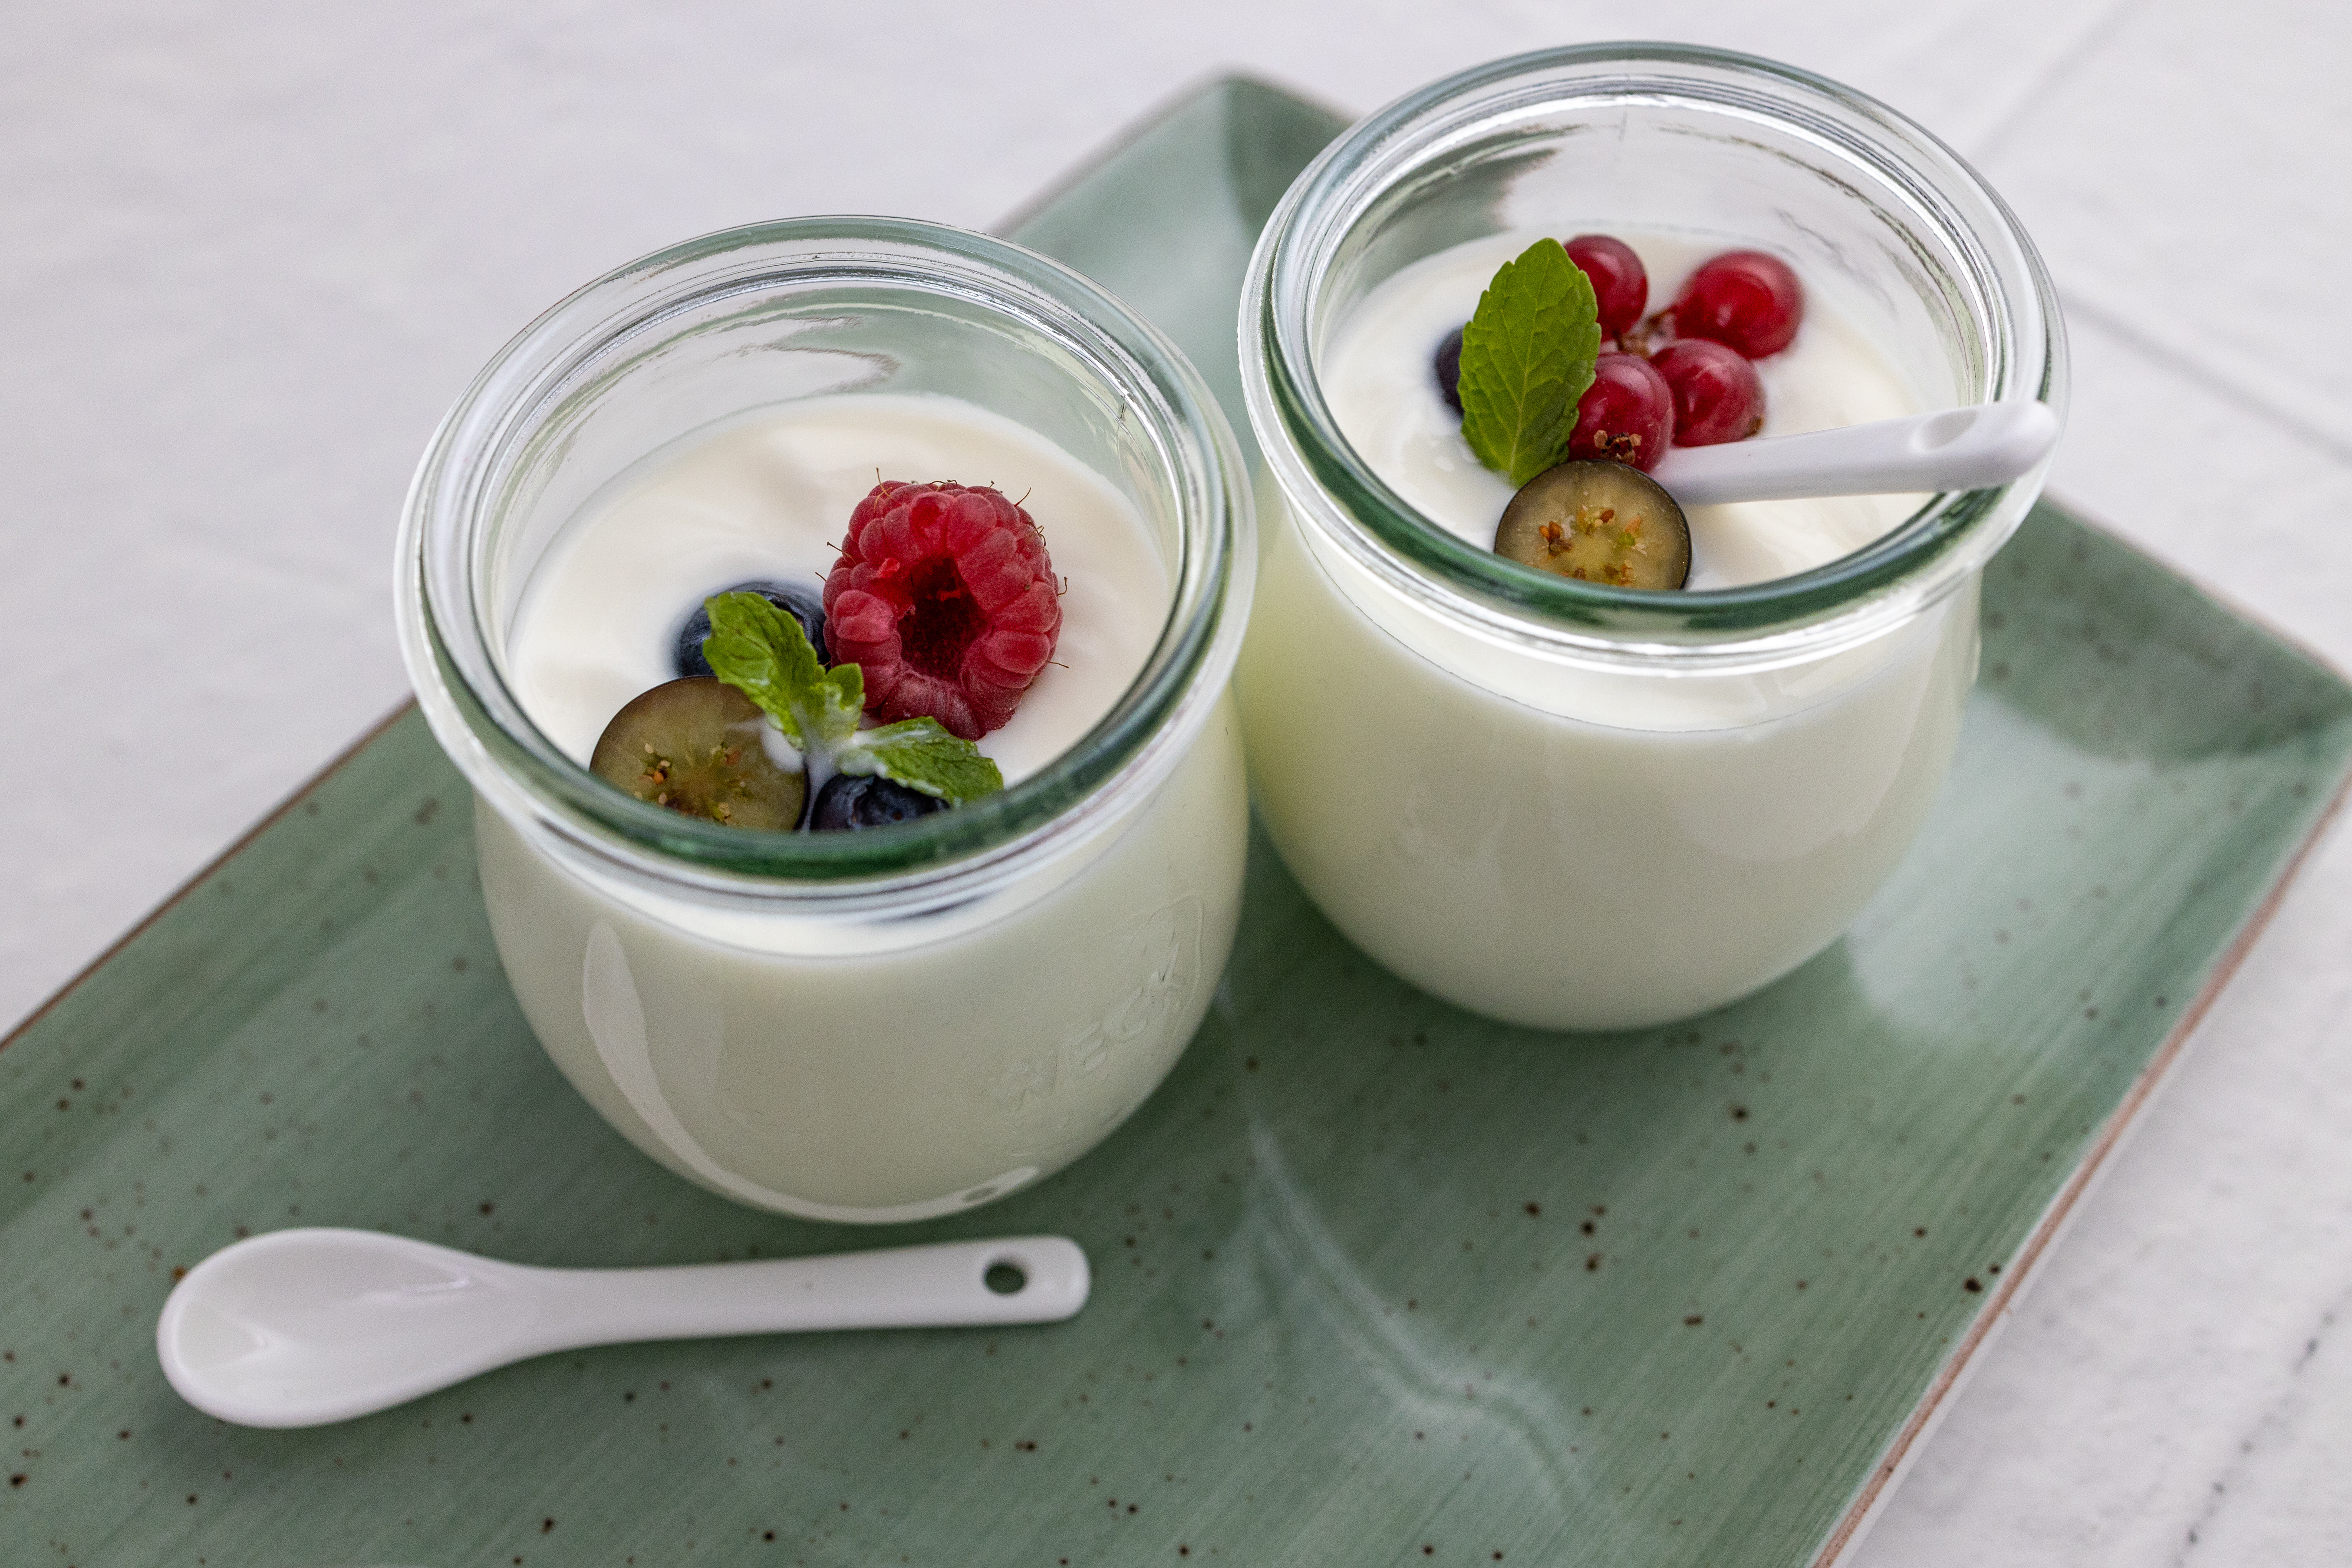 Tendra®: Tasty textured yoghurt as part of a plant based lifestyle